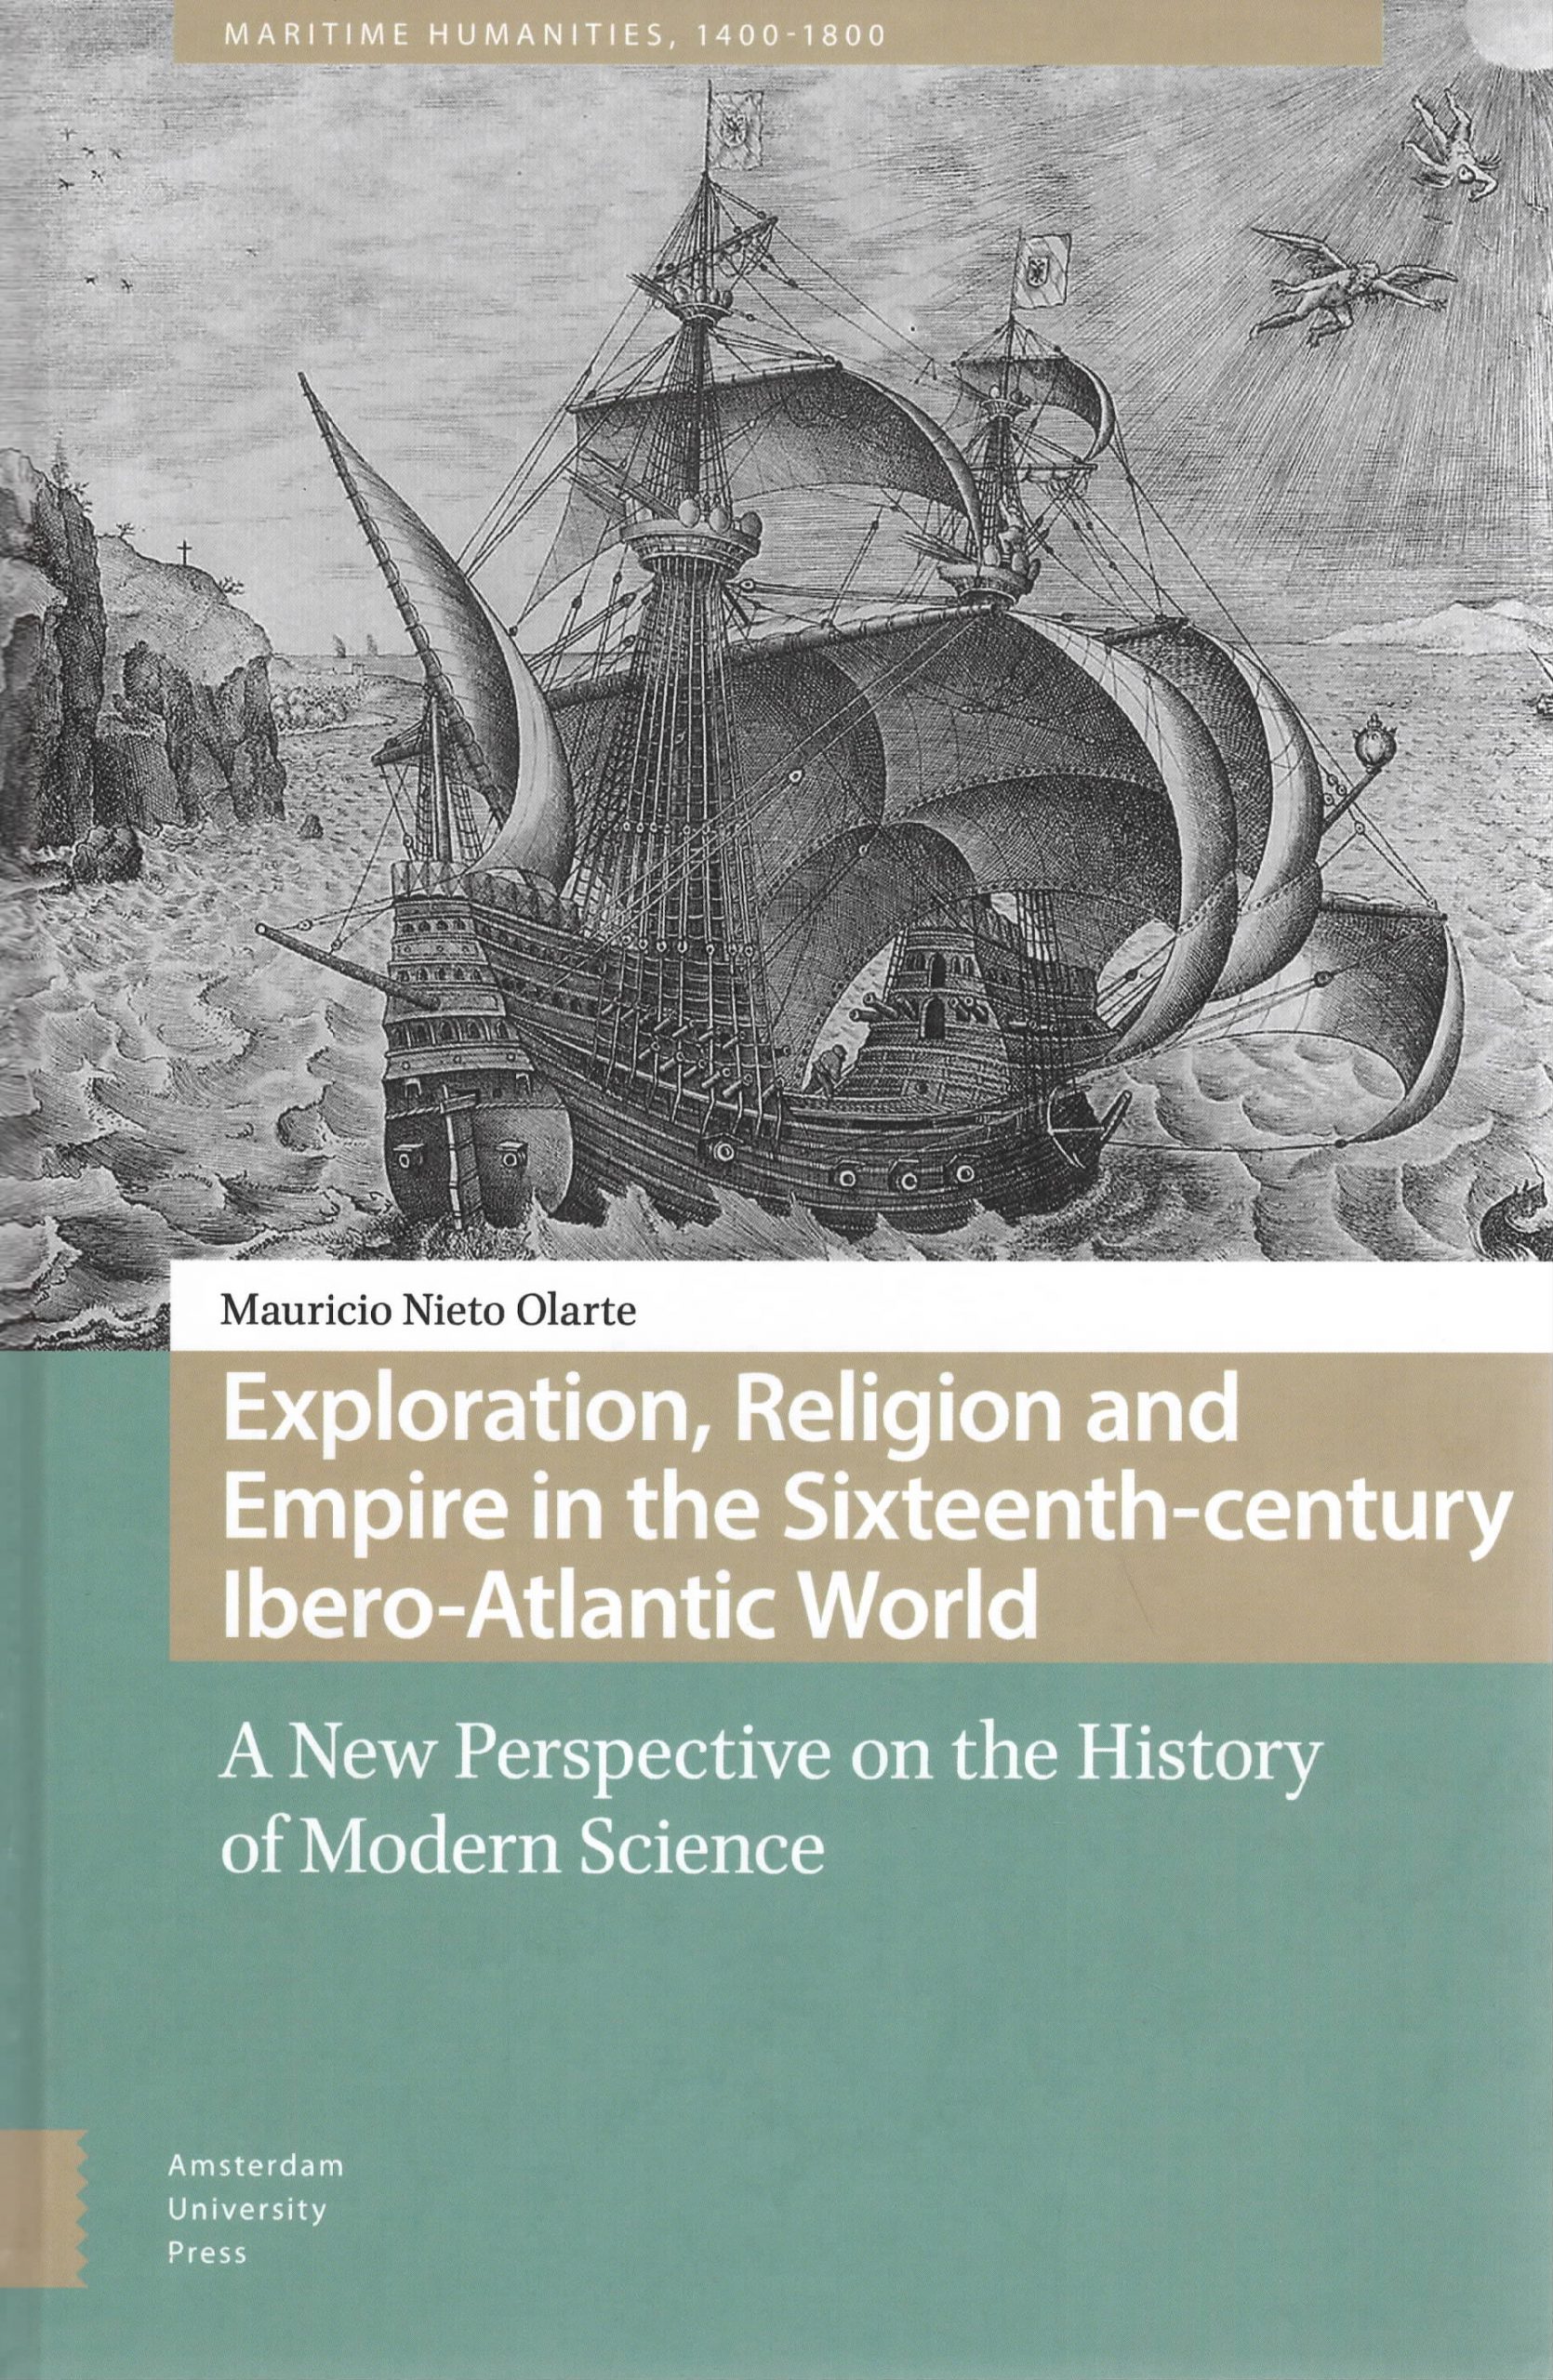 Exploration, religion, and empire in the sixteenth-century ibero-atlantic world: a new perspective on the history of modern science